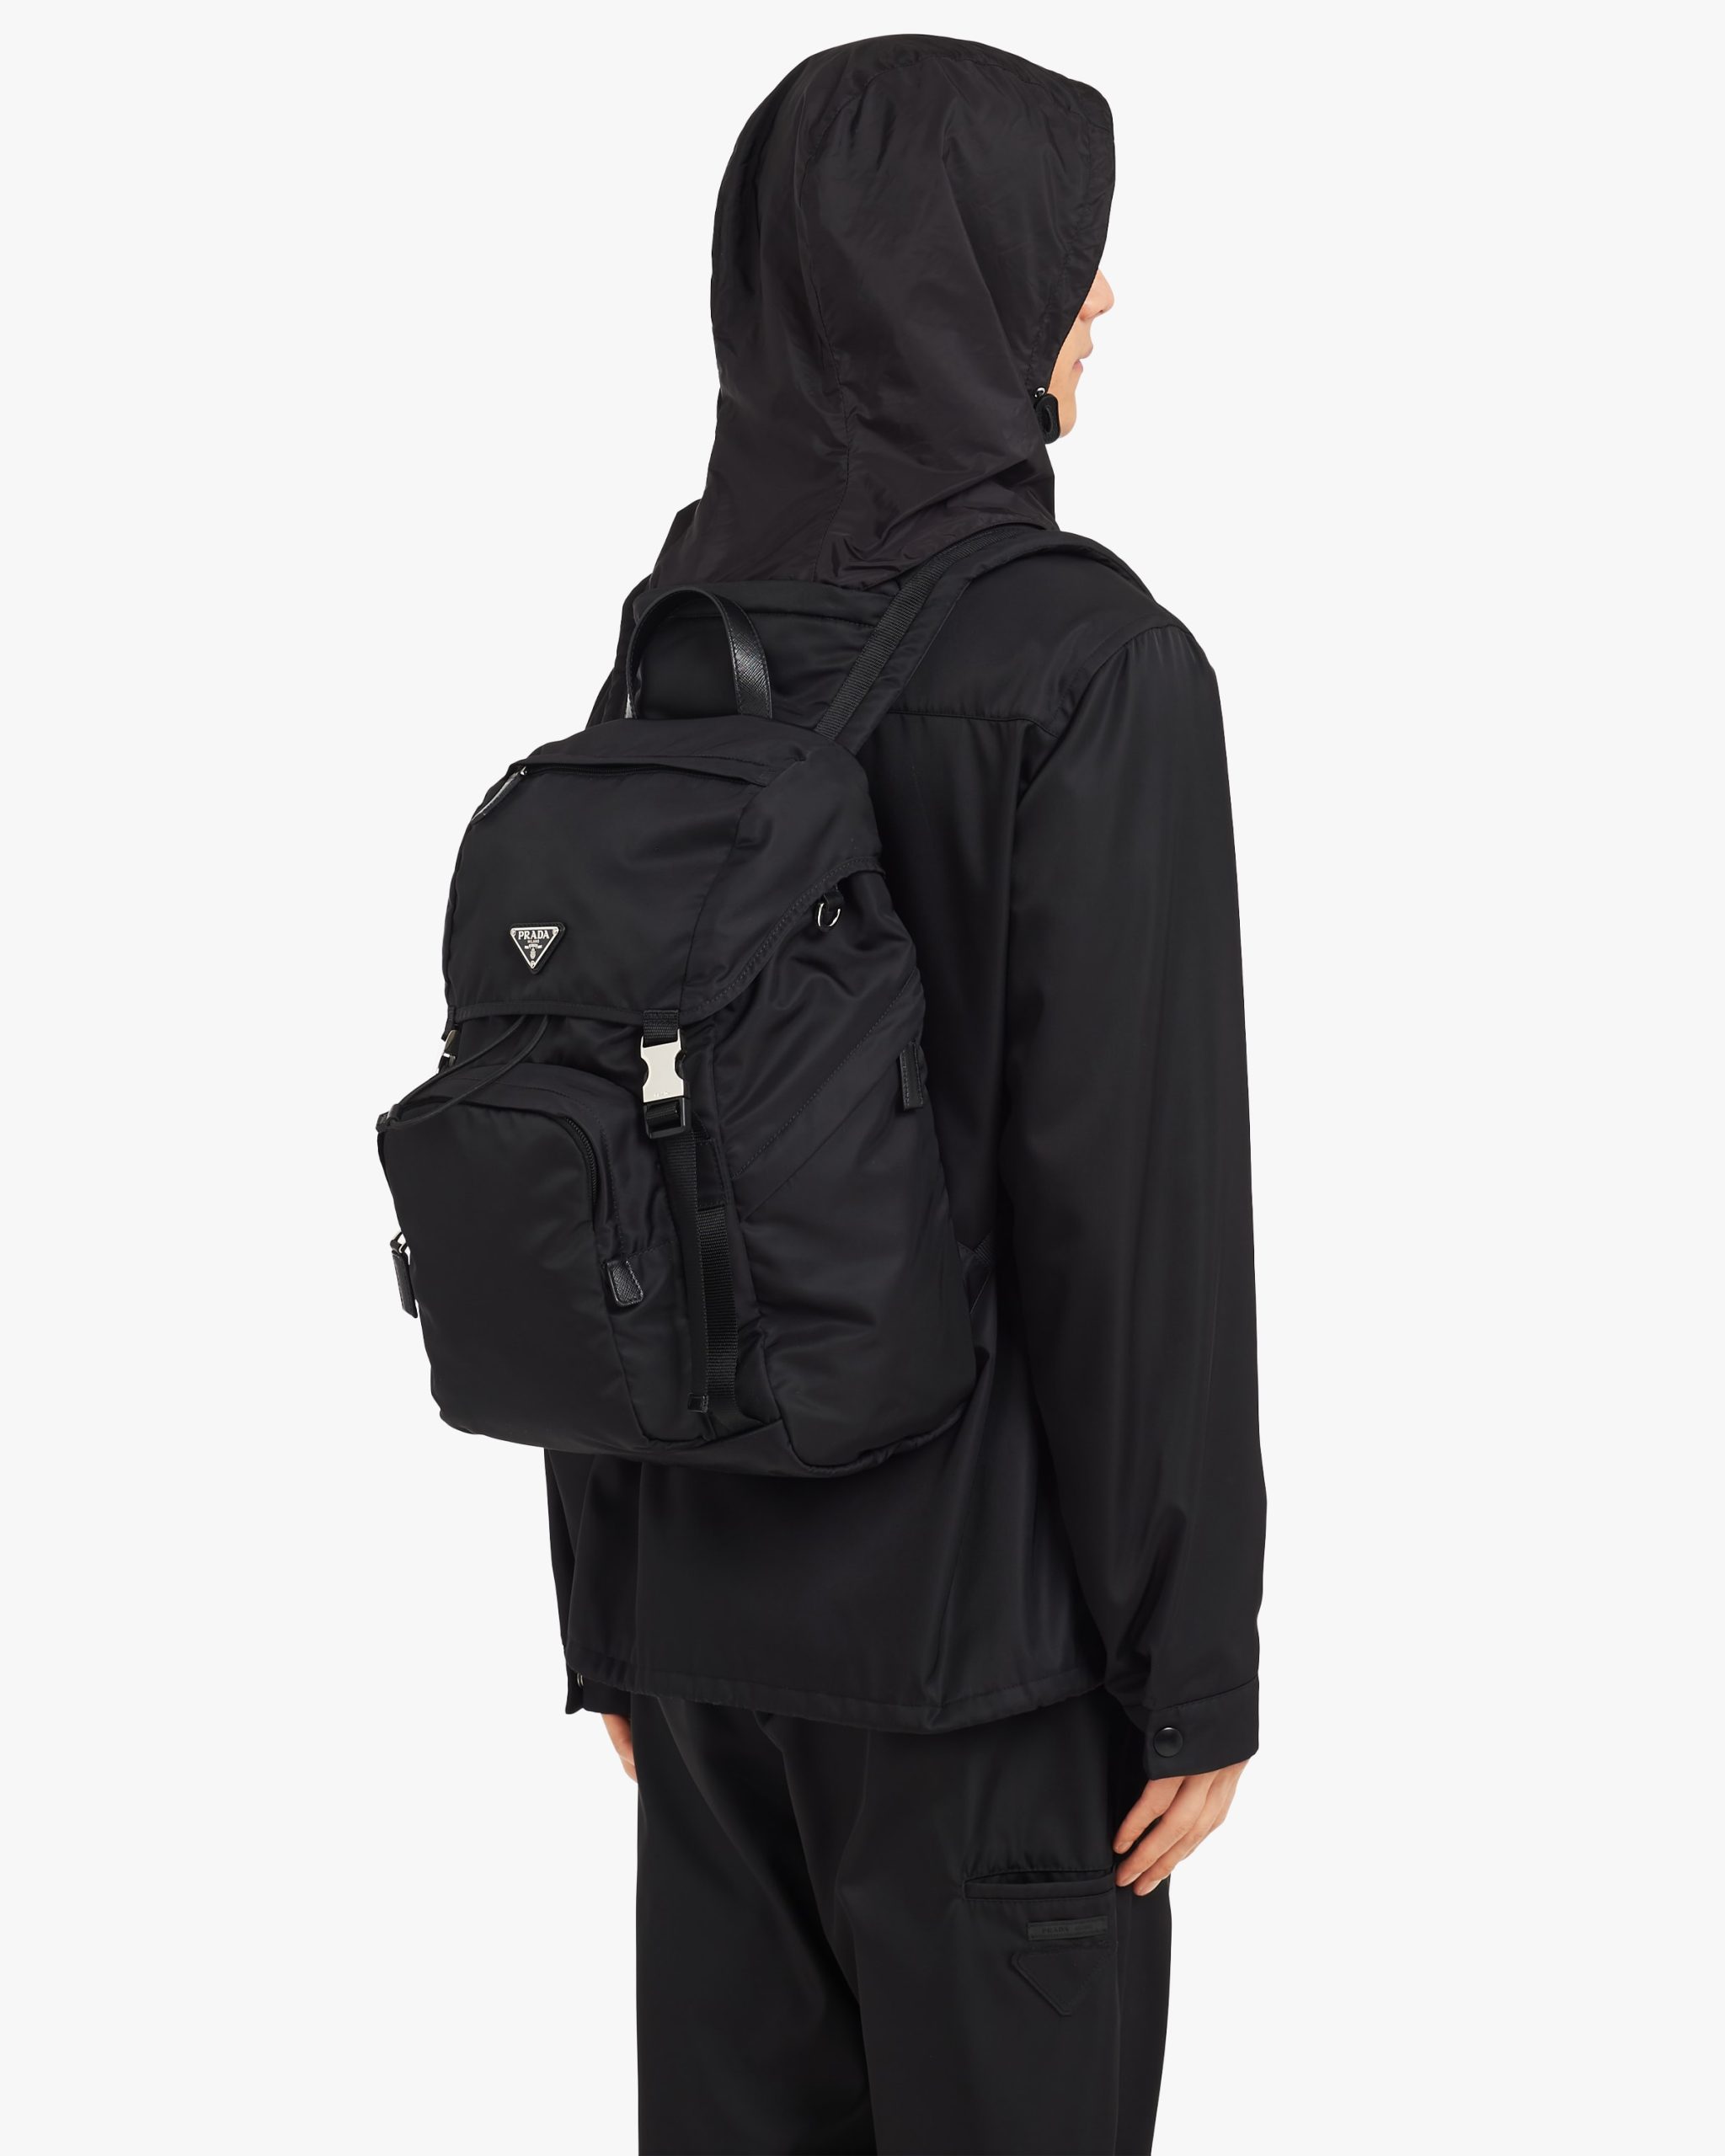 Black Re-Nylon and Saffiano leather backpack with hood - Fake Prada Store